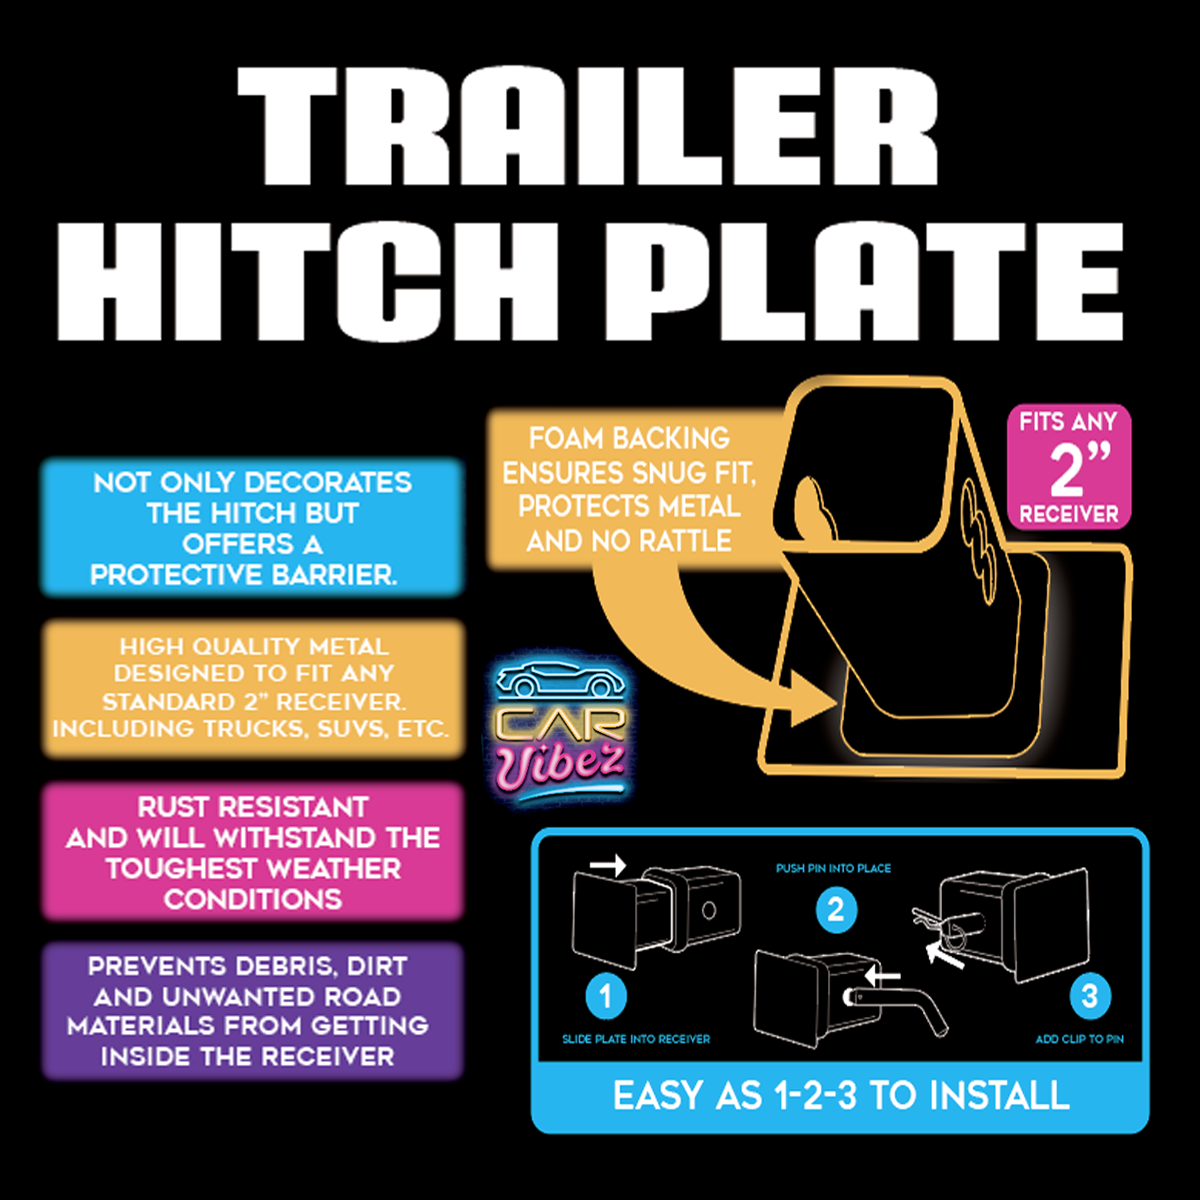 ITEM NUMBER 024069 TRAILER HITCH METAL PLATE 6 PIECES PER DISPLAY